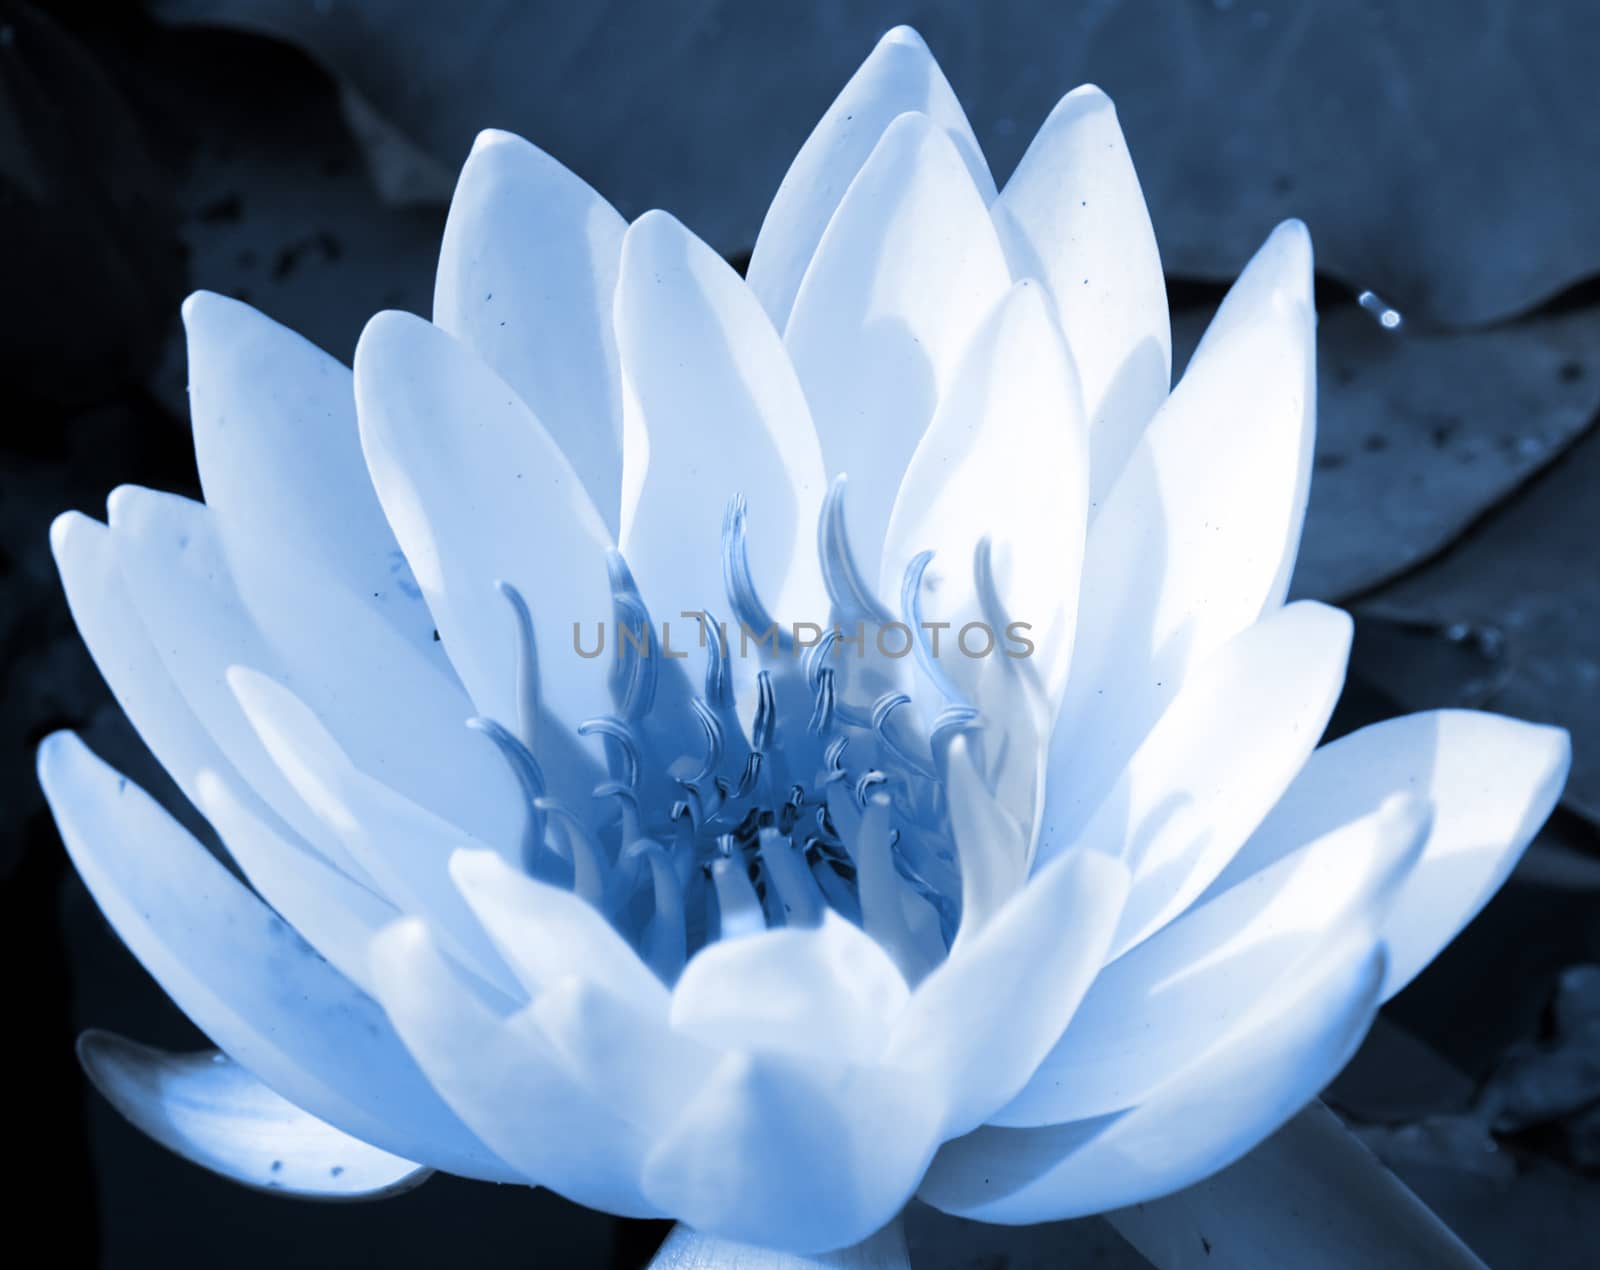 Closeup image of a white water lily